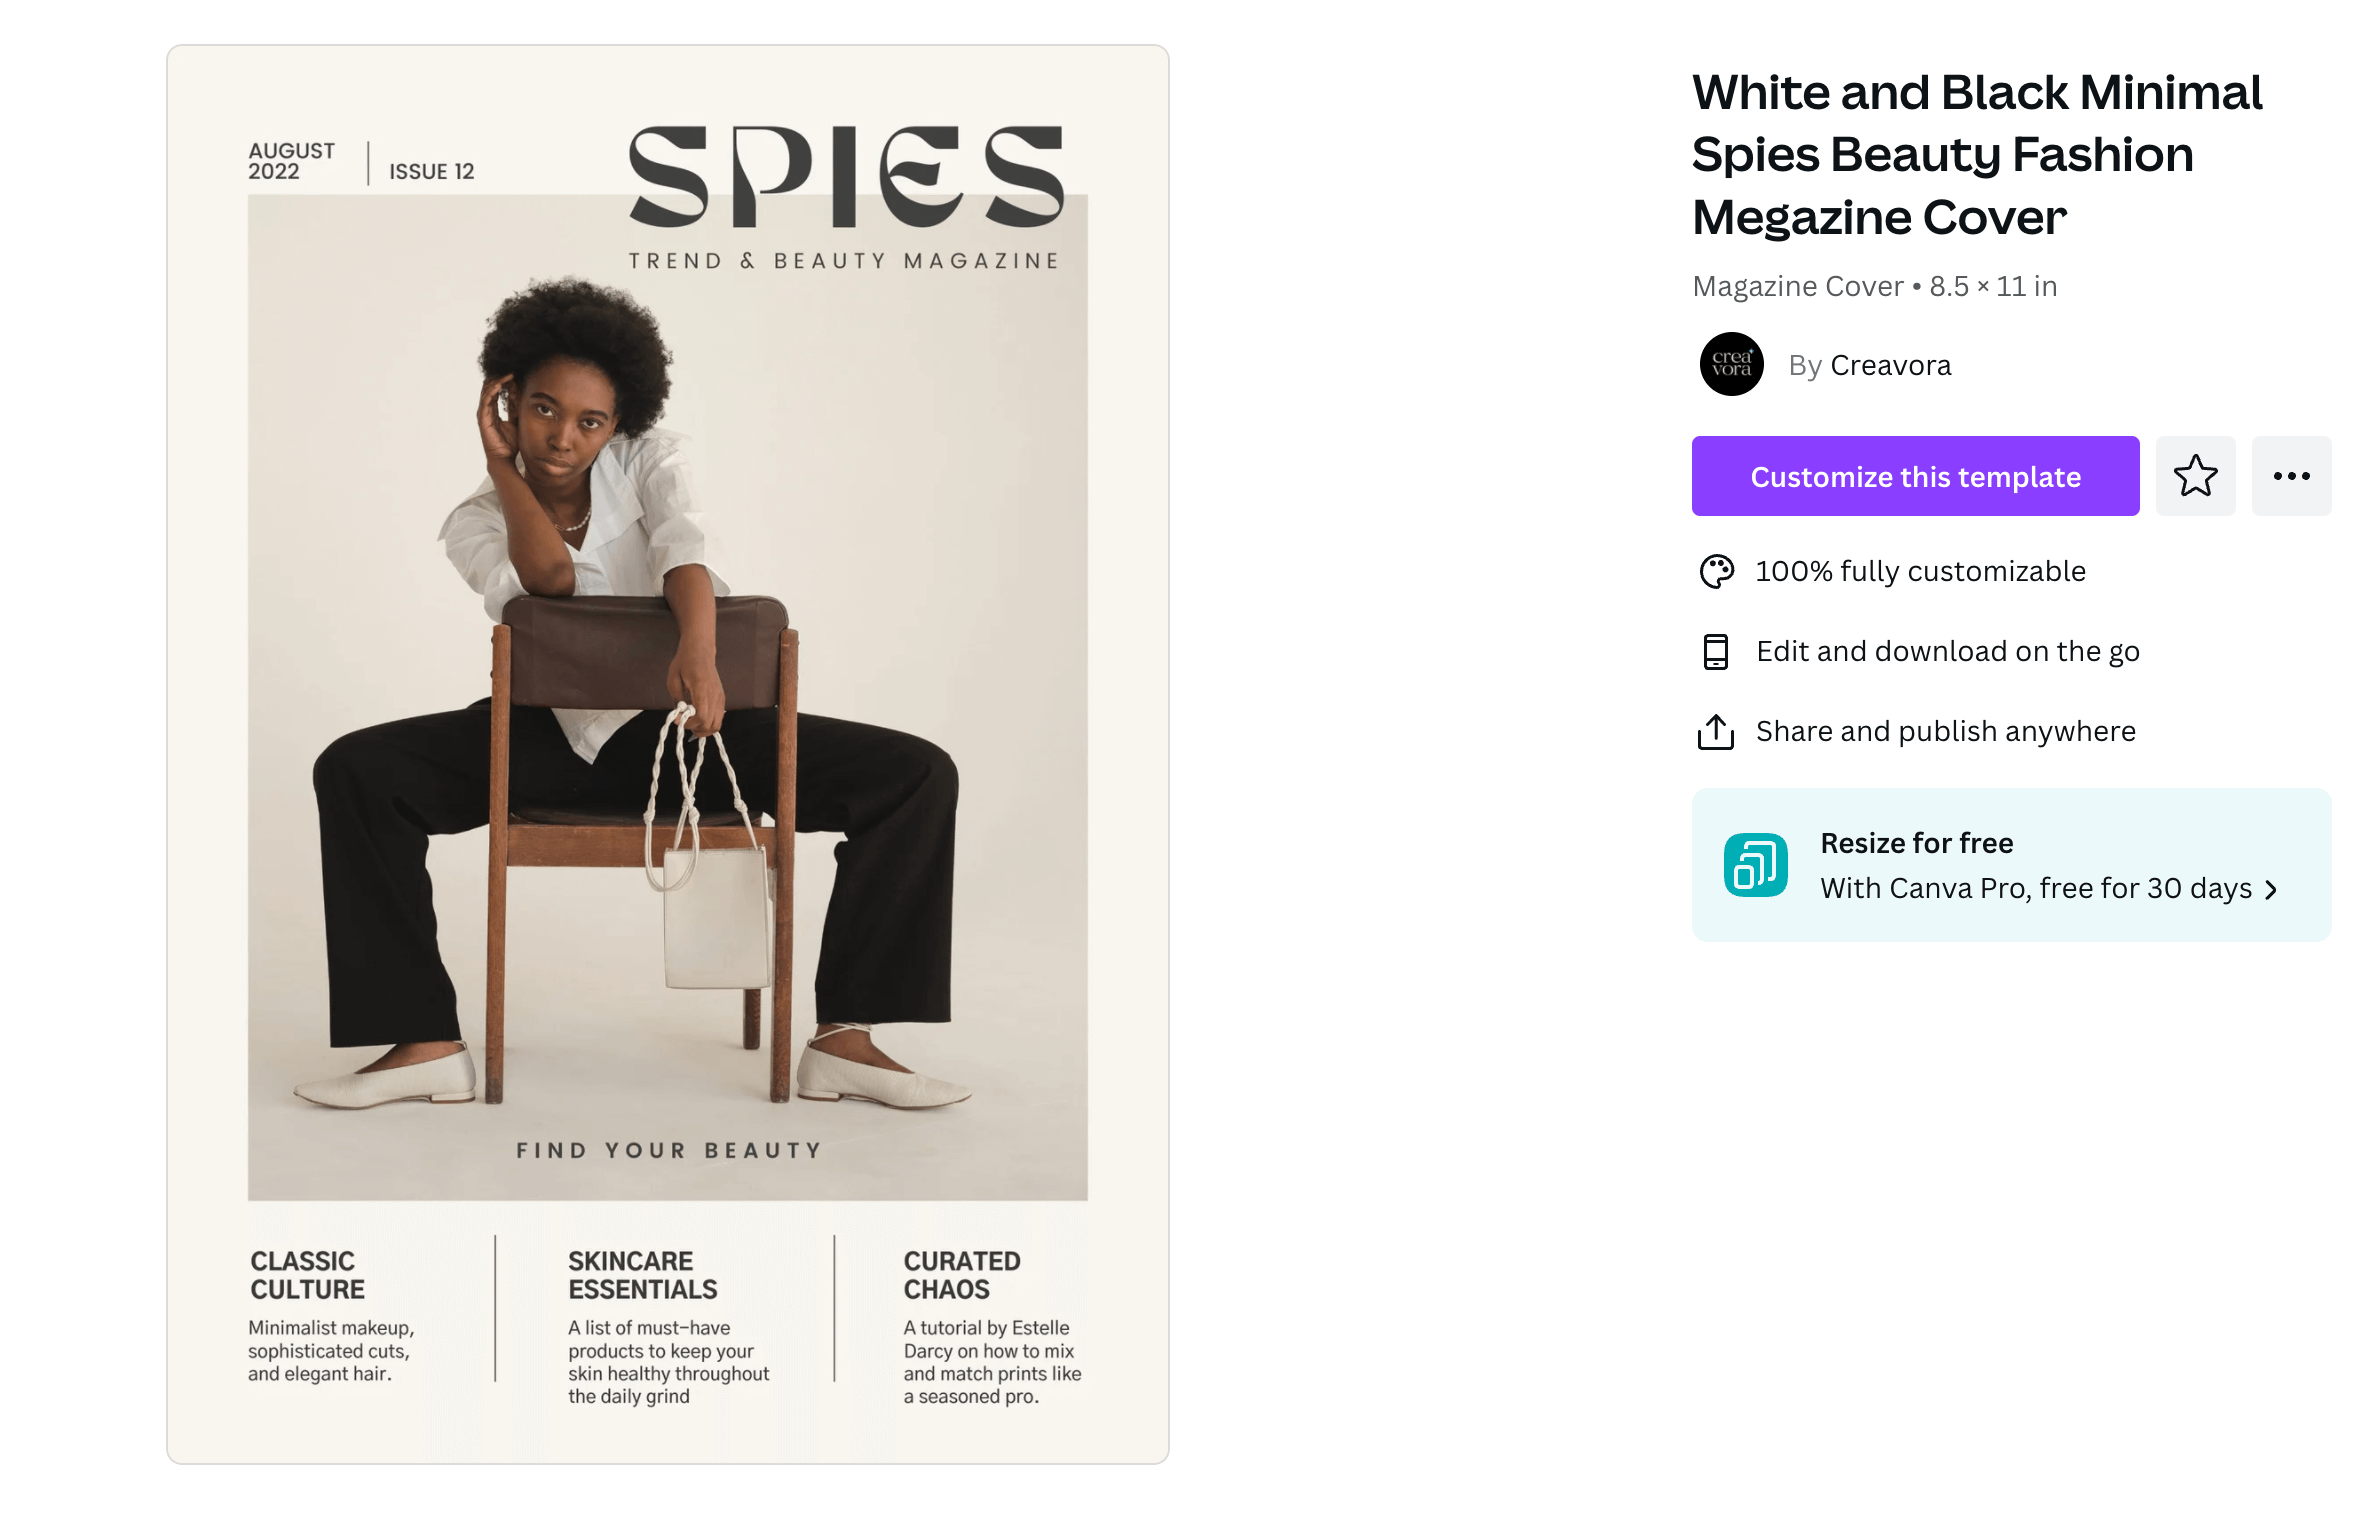 A magazine cover featuring a model sitting backwards on a chair